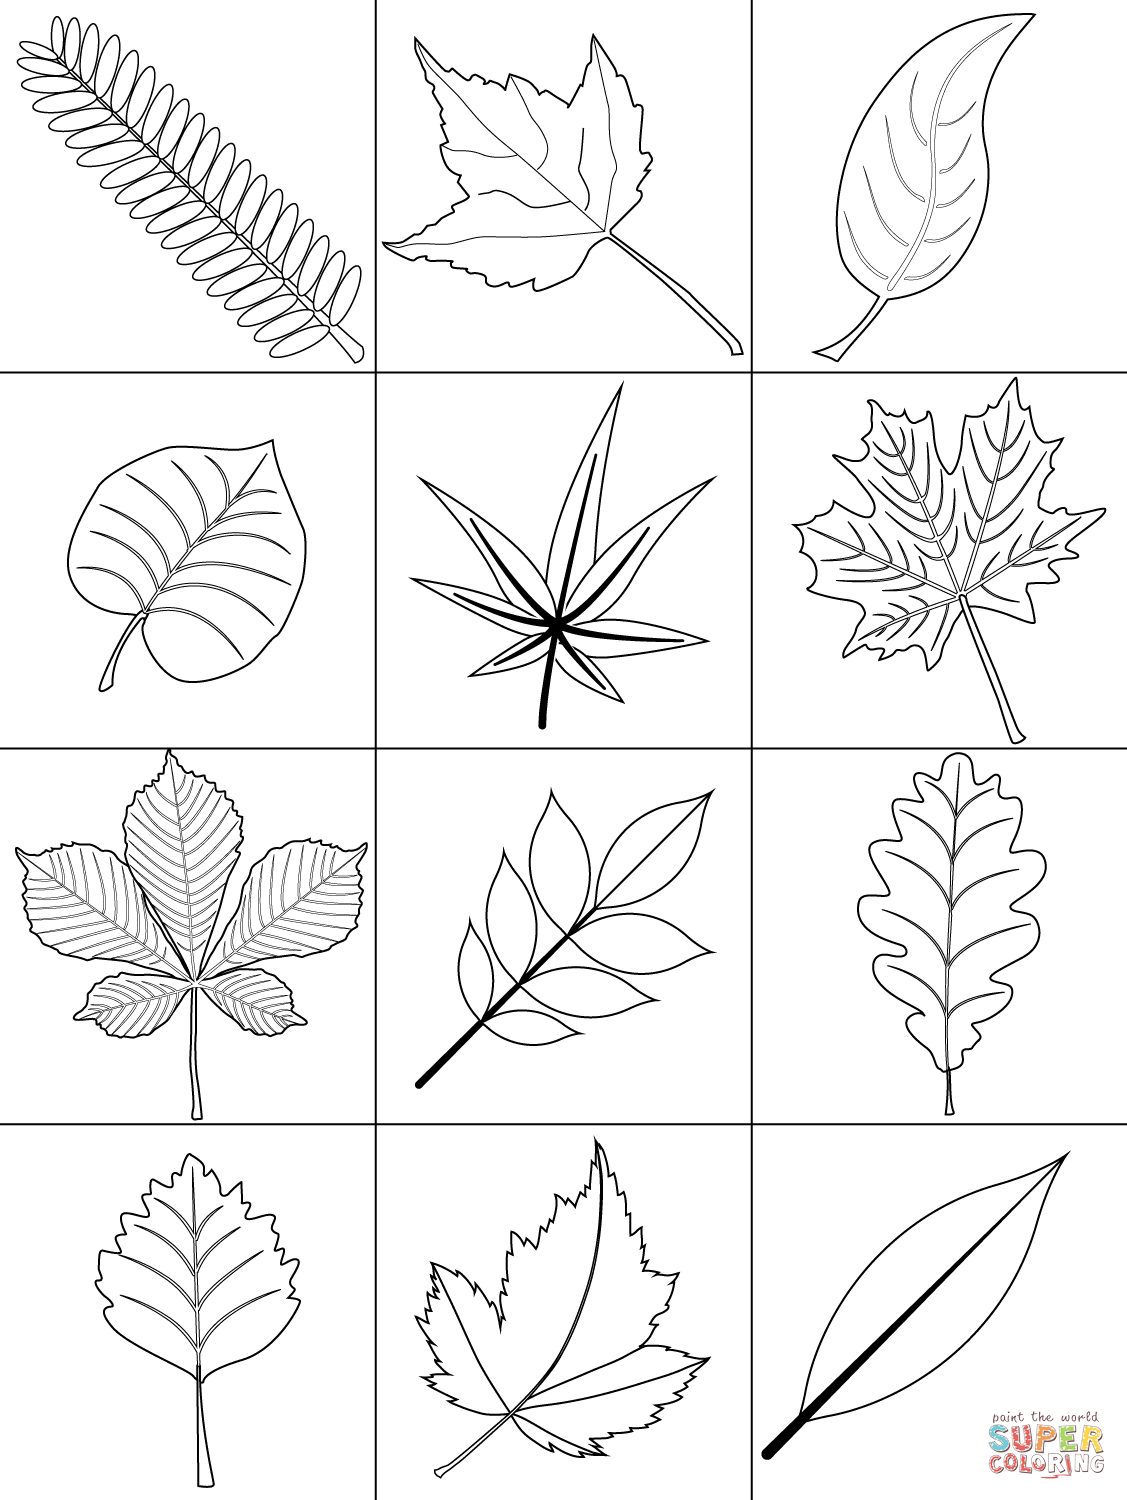 Free Coloring Pages Of Leaves Autumn Leaves Coloring Page Free Printable Coloring Pages